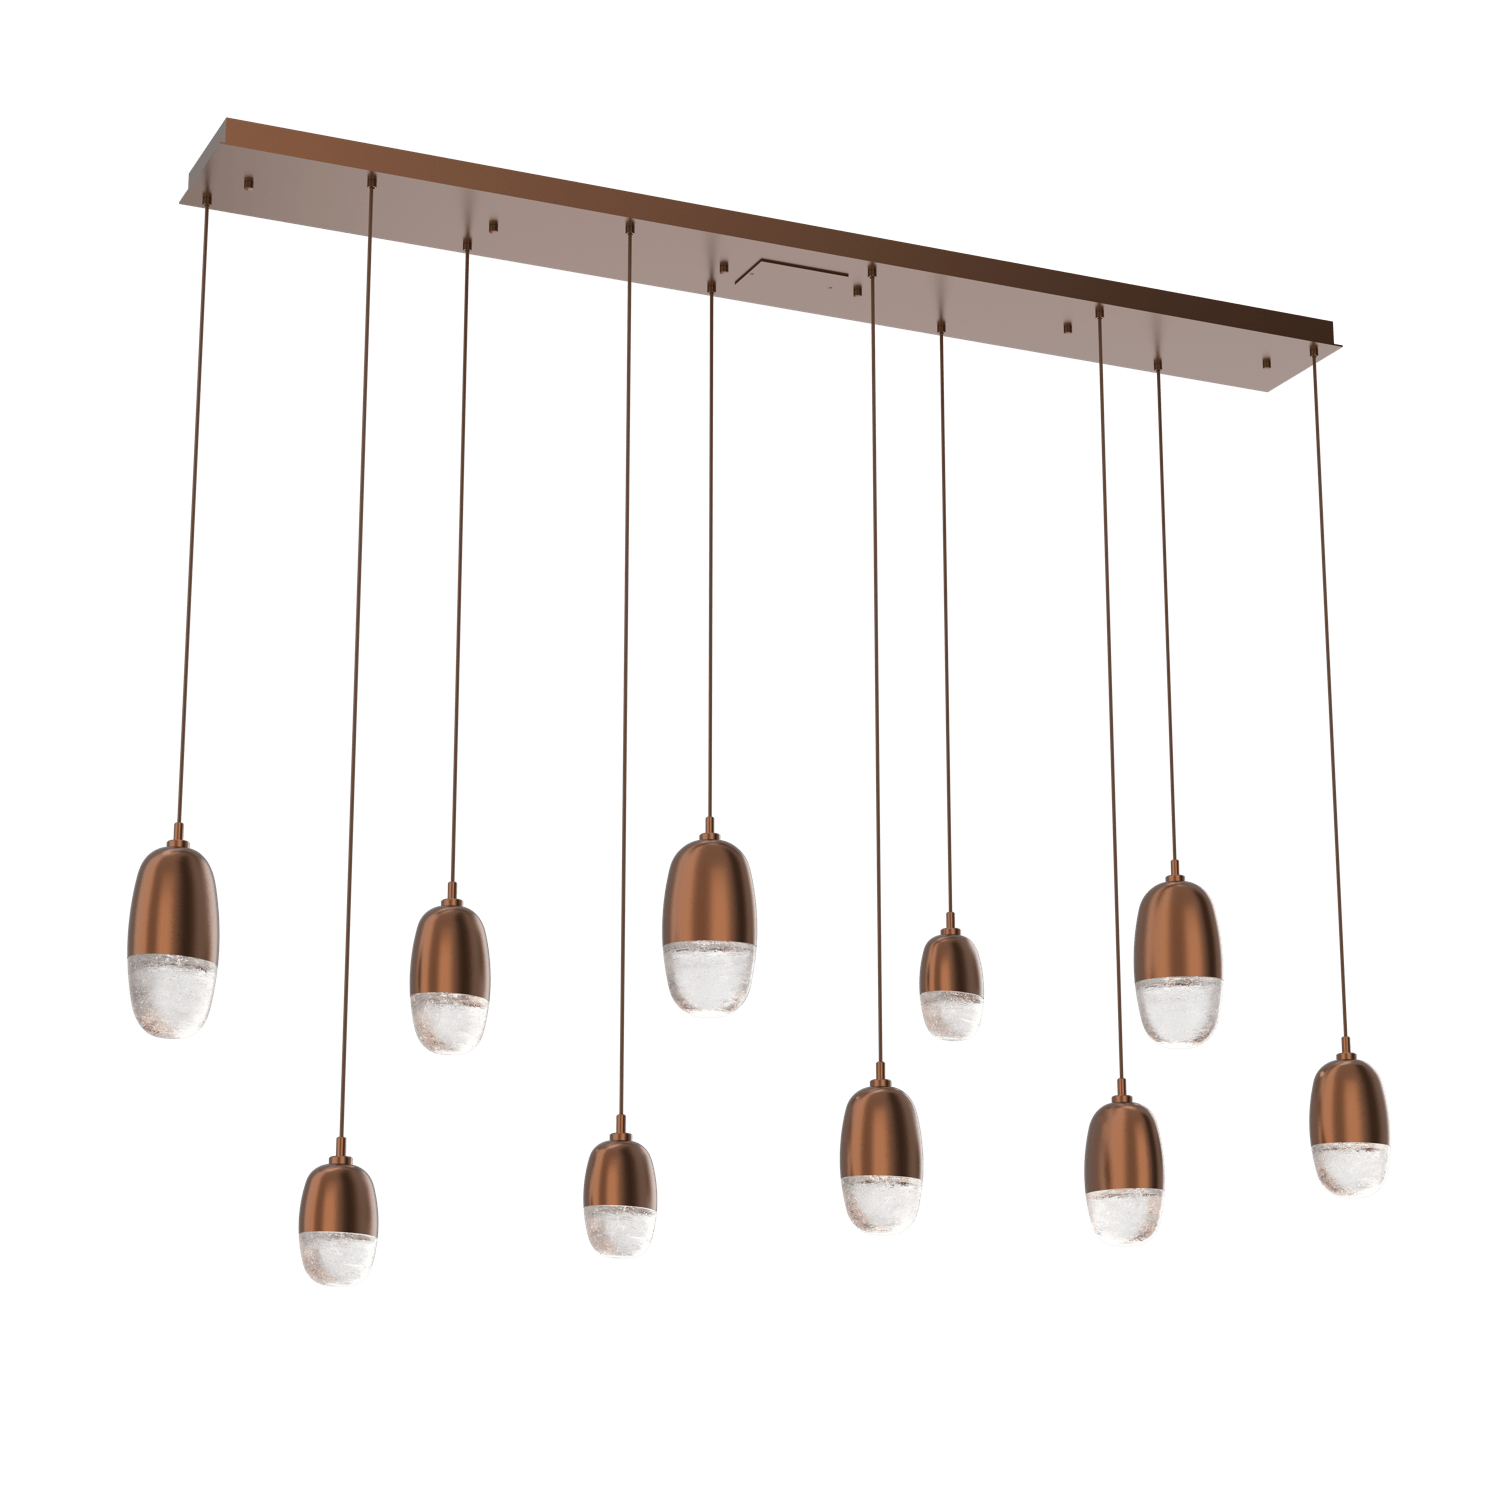 PLB0079-09-BB-Hammerton-Studio-Pebble-9-light-linear-pendant-chandelier-with-burnished-bronze-finish-and-clear-cast-glass-shades-and-LED-lamping